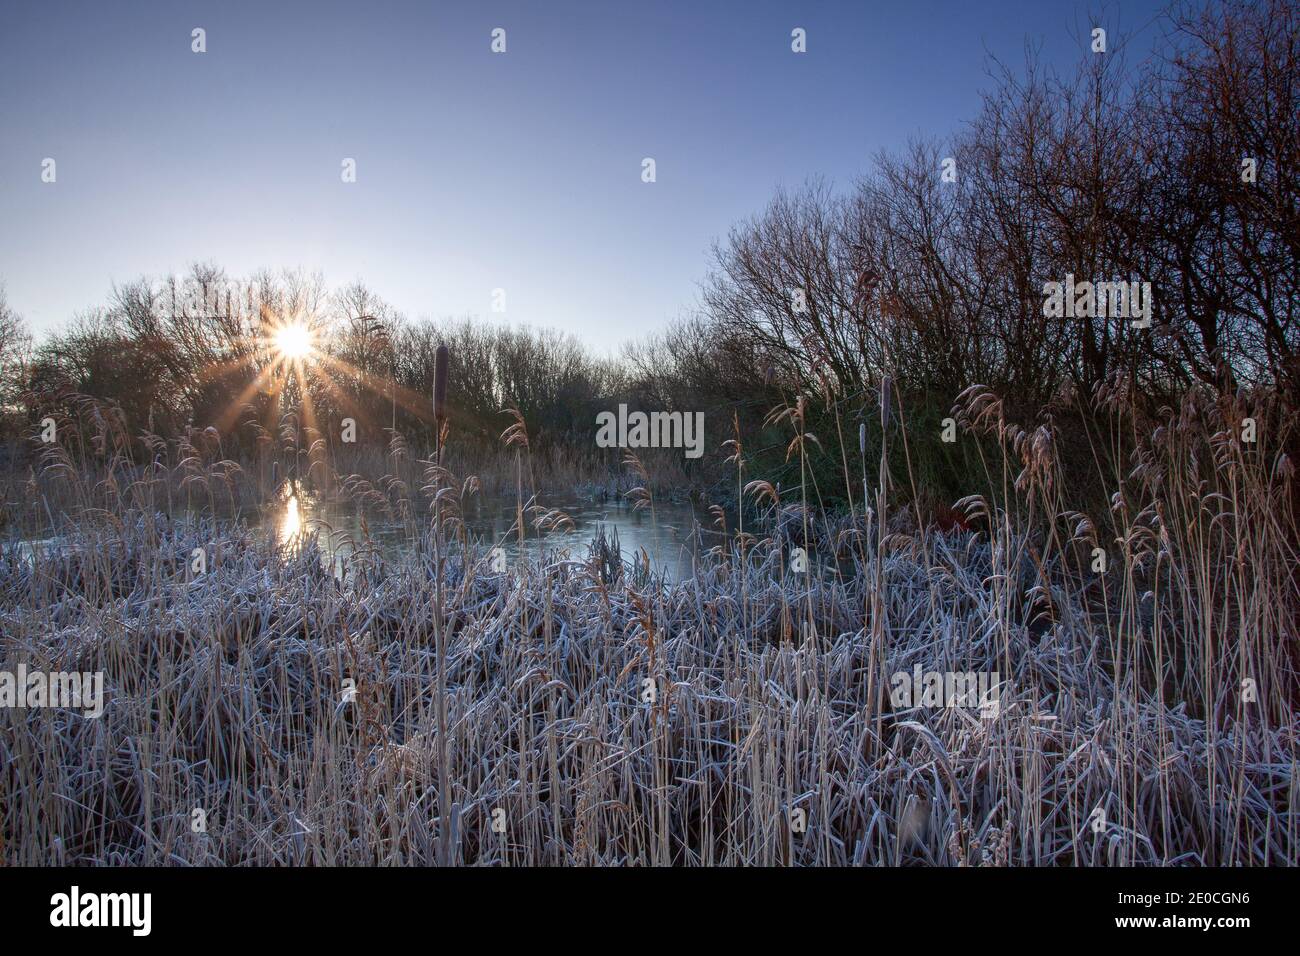 Barton-upon-Humber, North Lincolnshire, UK. 31st December 2020. UK Weather: A cold and frosty morning on New Year's Eve. Credit: LEE BEEL/Alamy Live News. Stock Photo